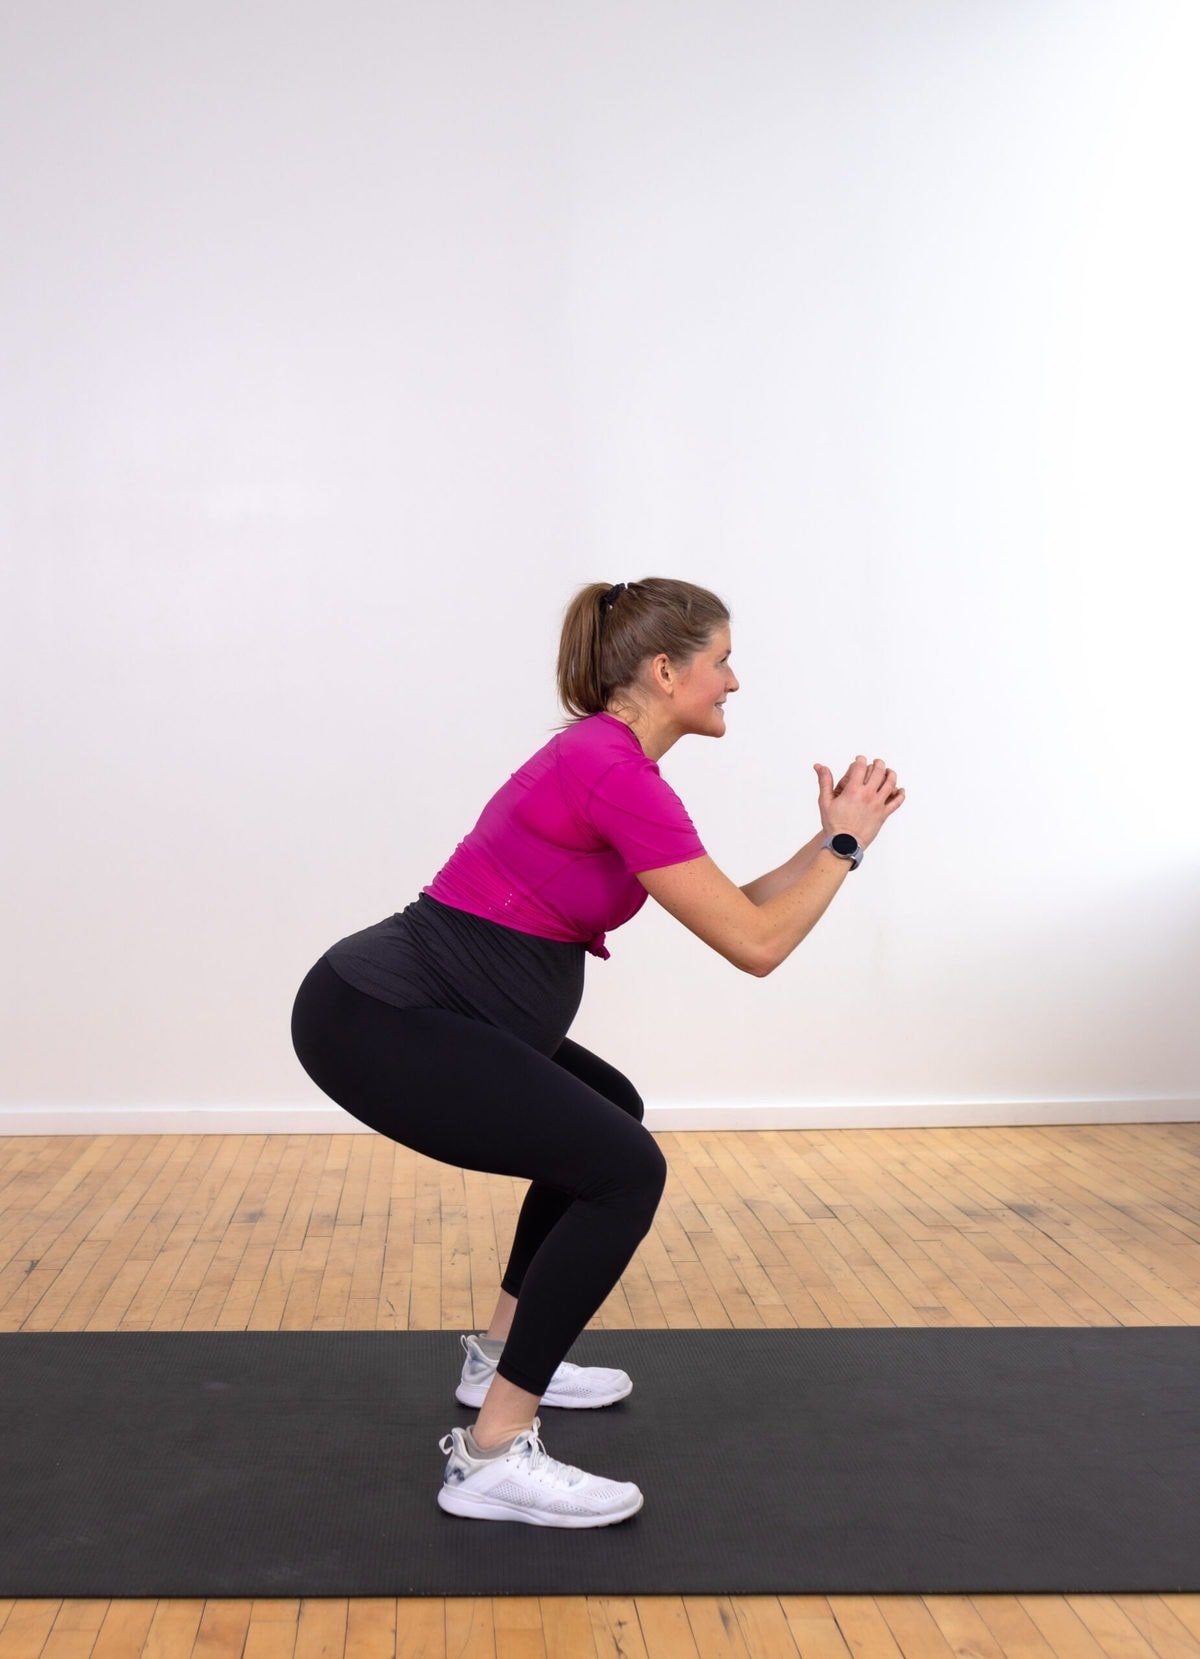 6 Best Home Exercises without Equipment